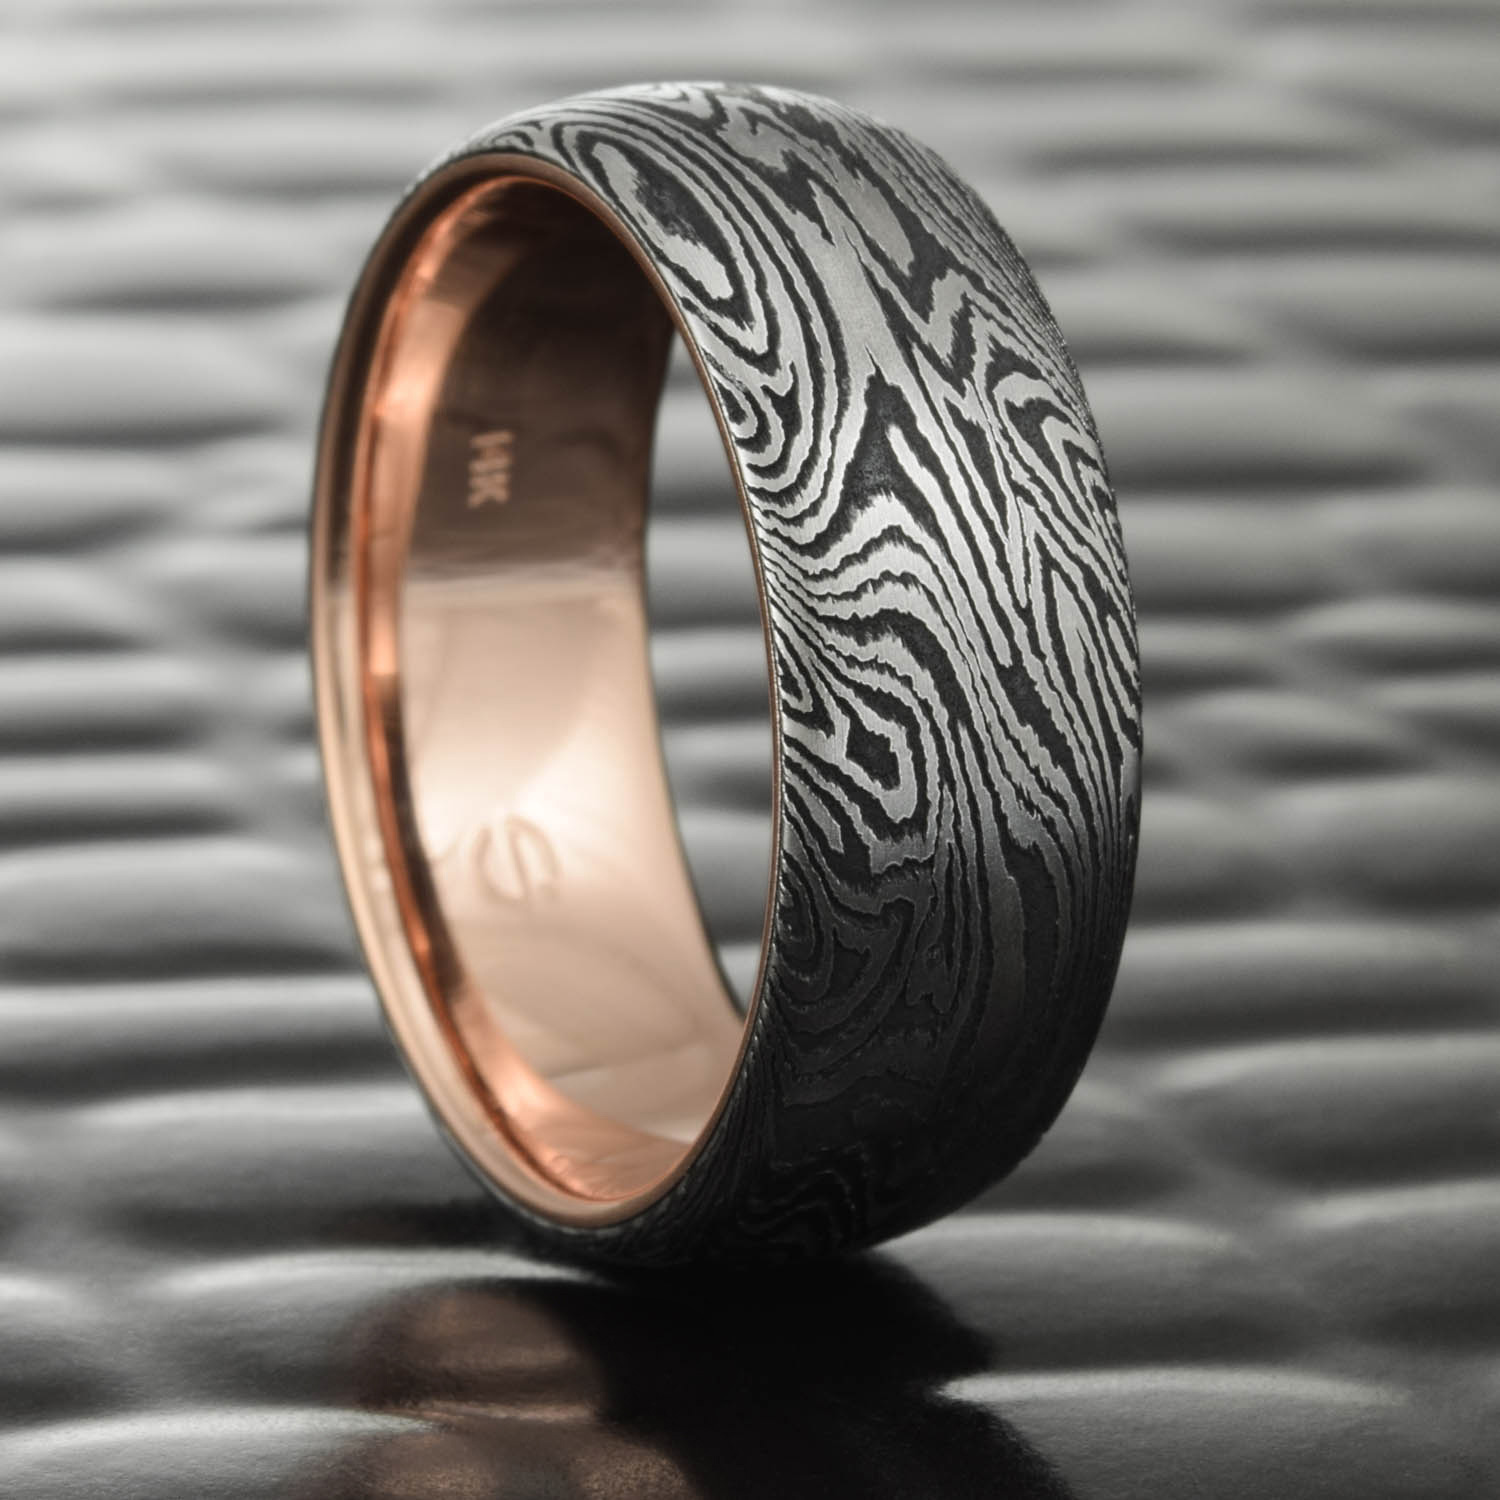 Jewels By Lux Titanium Sterling Silver Inlay 6mm Brushed Band